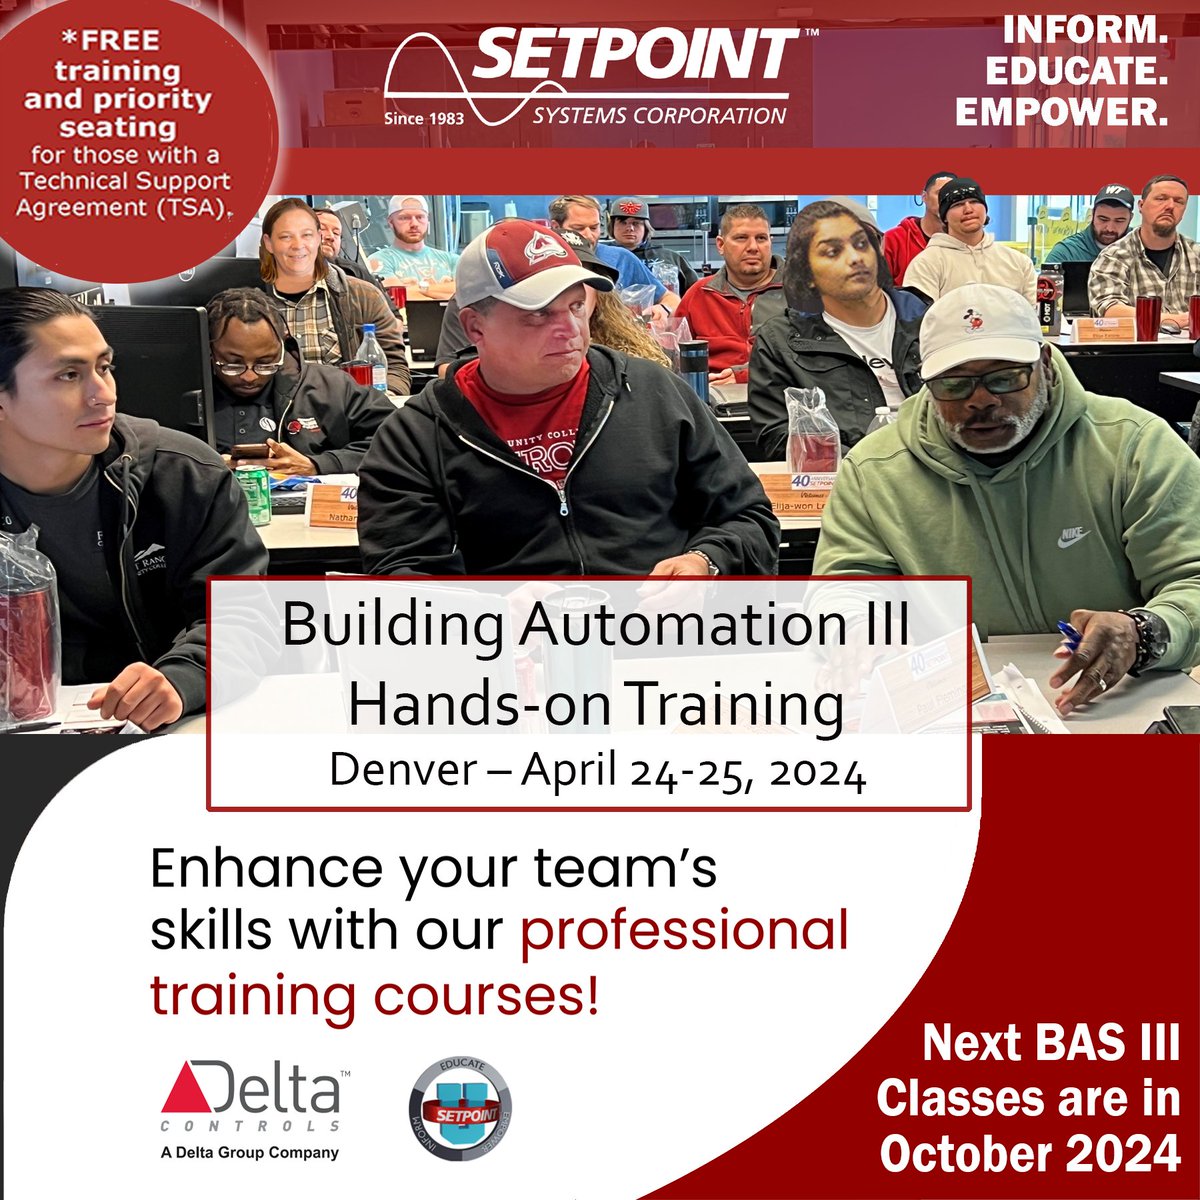 If you want BAS III training, sign up for the October classes today OR call us about Onsite Training at Your Place!
#iot #ul508a #ualocal208 #HVAC #BAStraining #Buildingautomation #enteliweb #corporatetraining #Buildingautomationtraining #hvactraining #deltacontrols